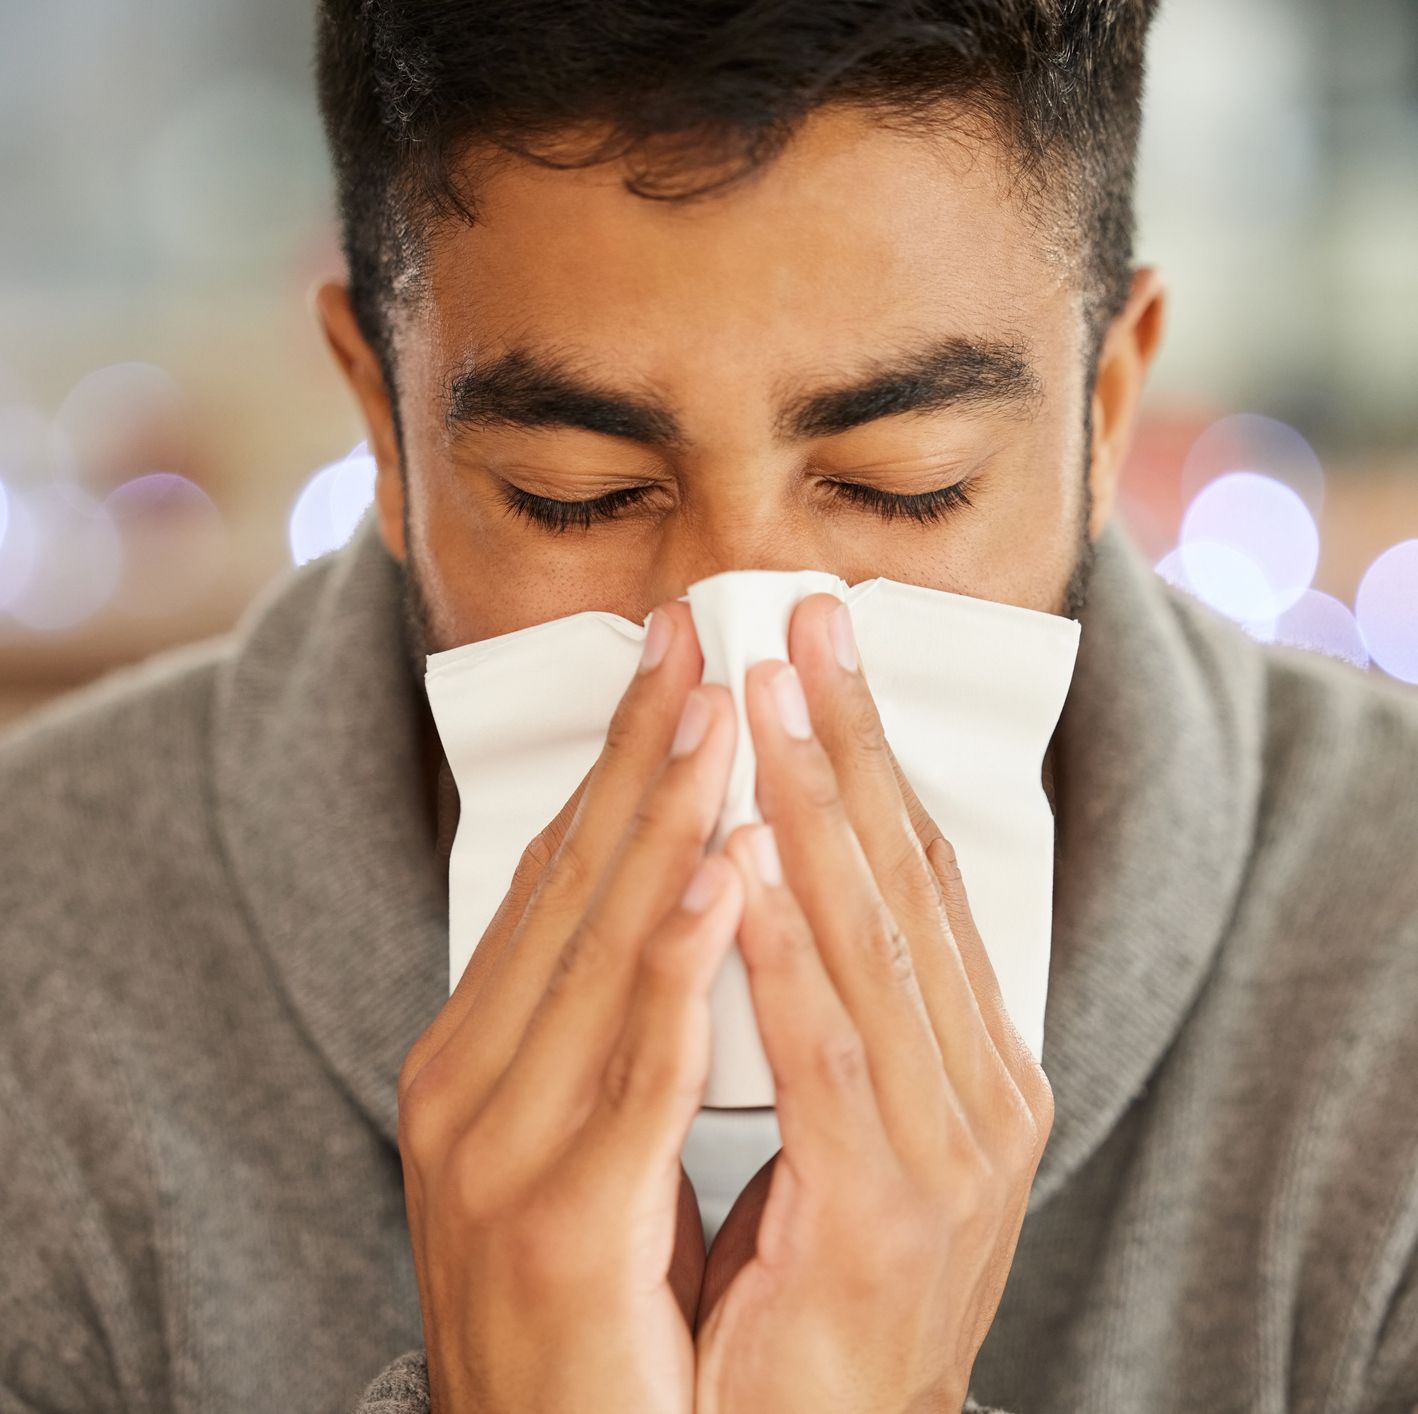 The 5 Best Ways to Get Rid of a Stuffy Nose